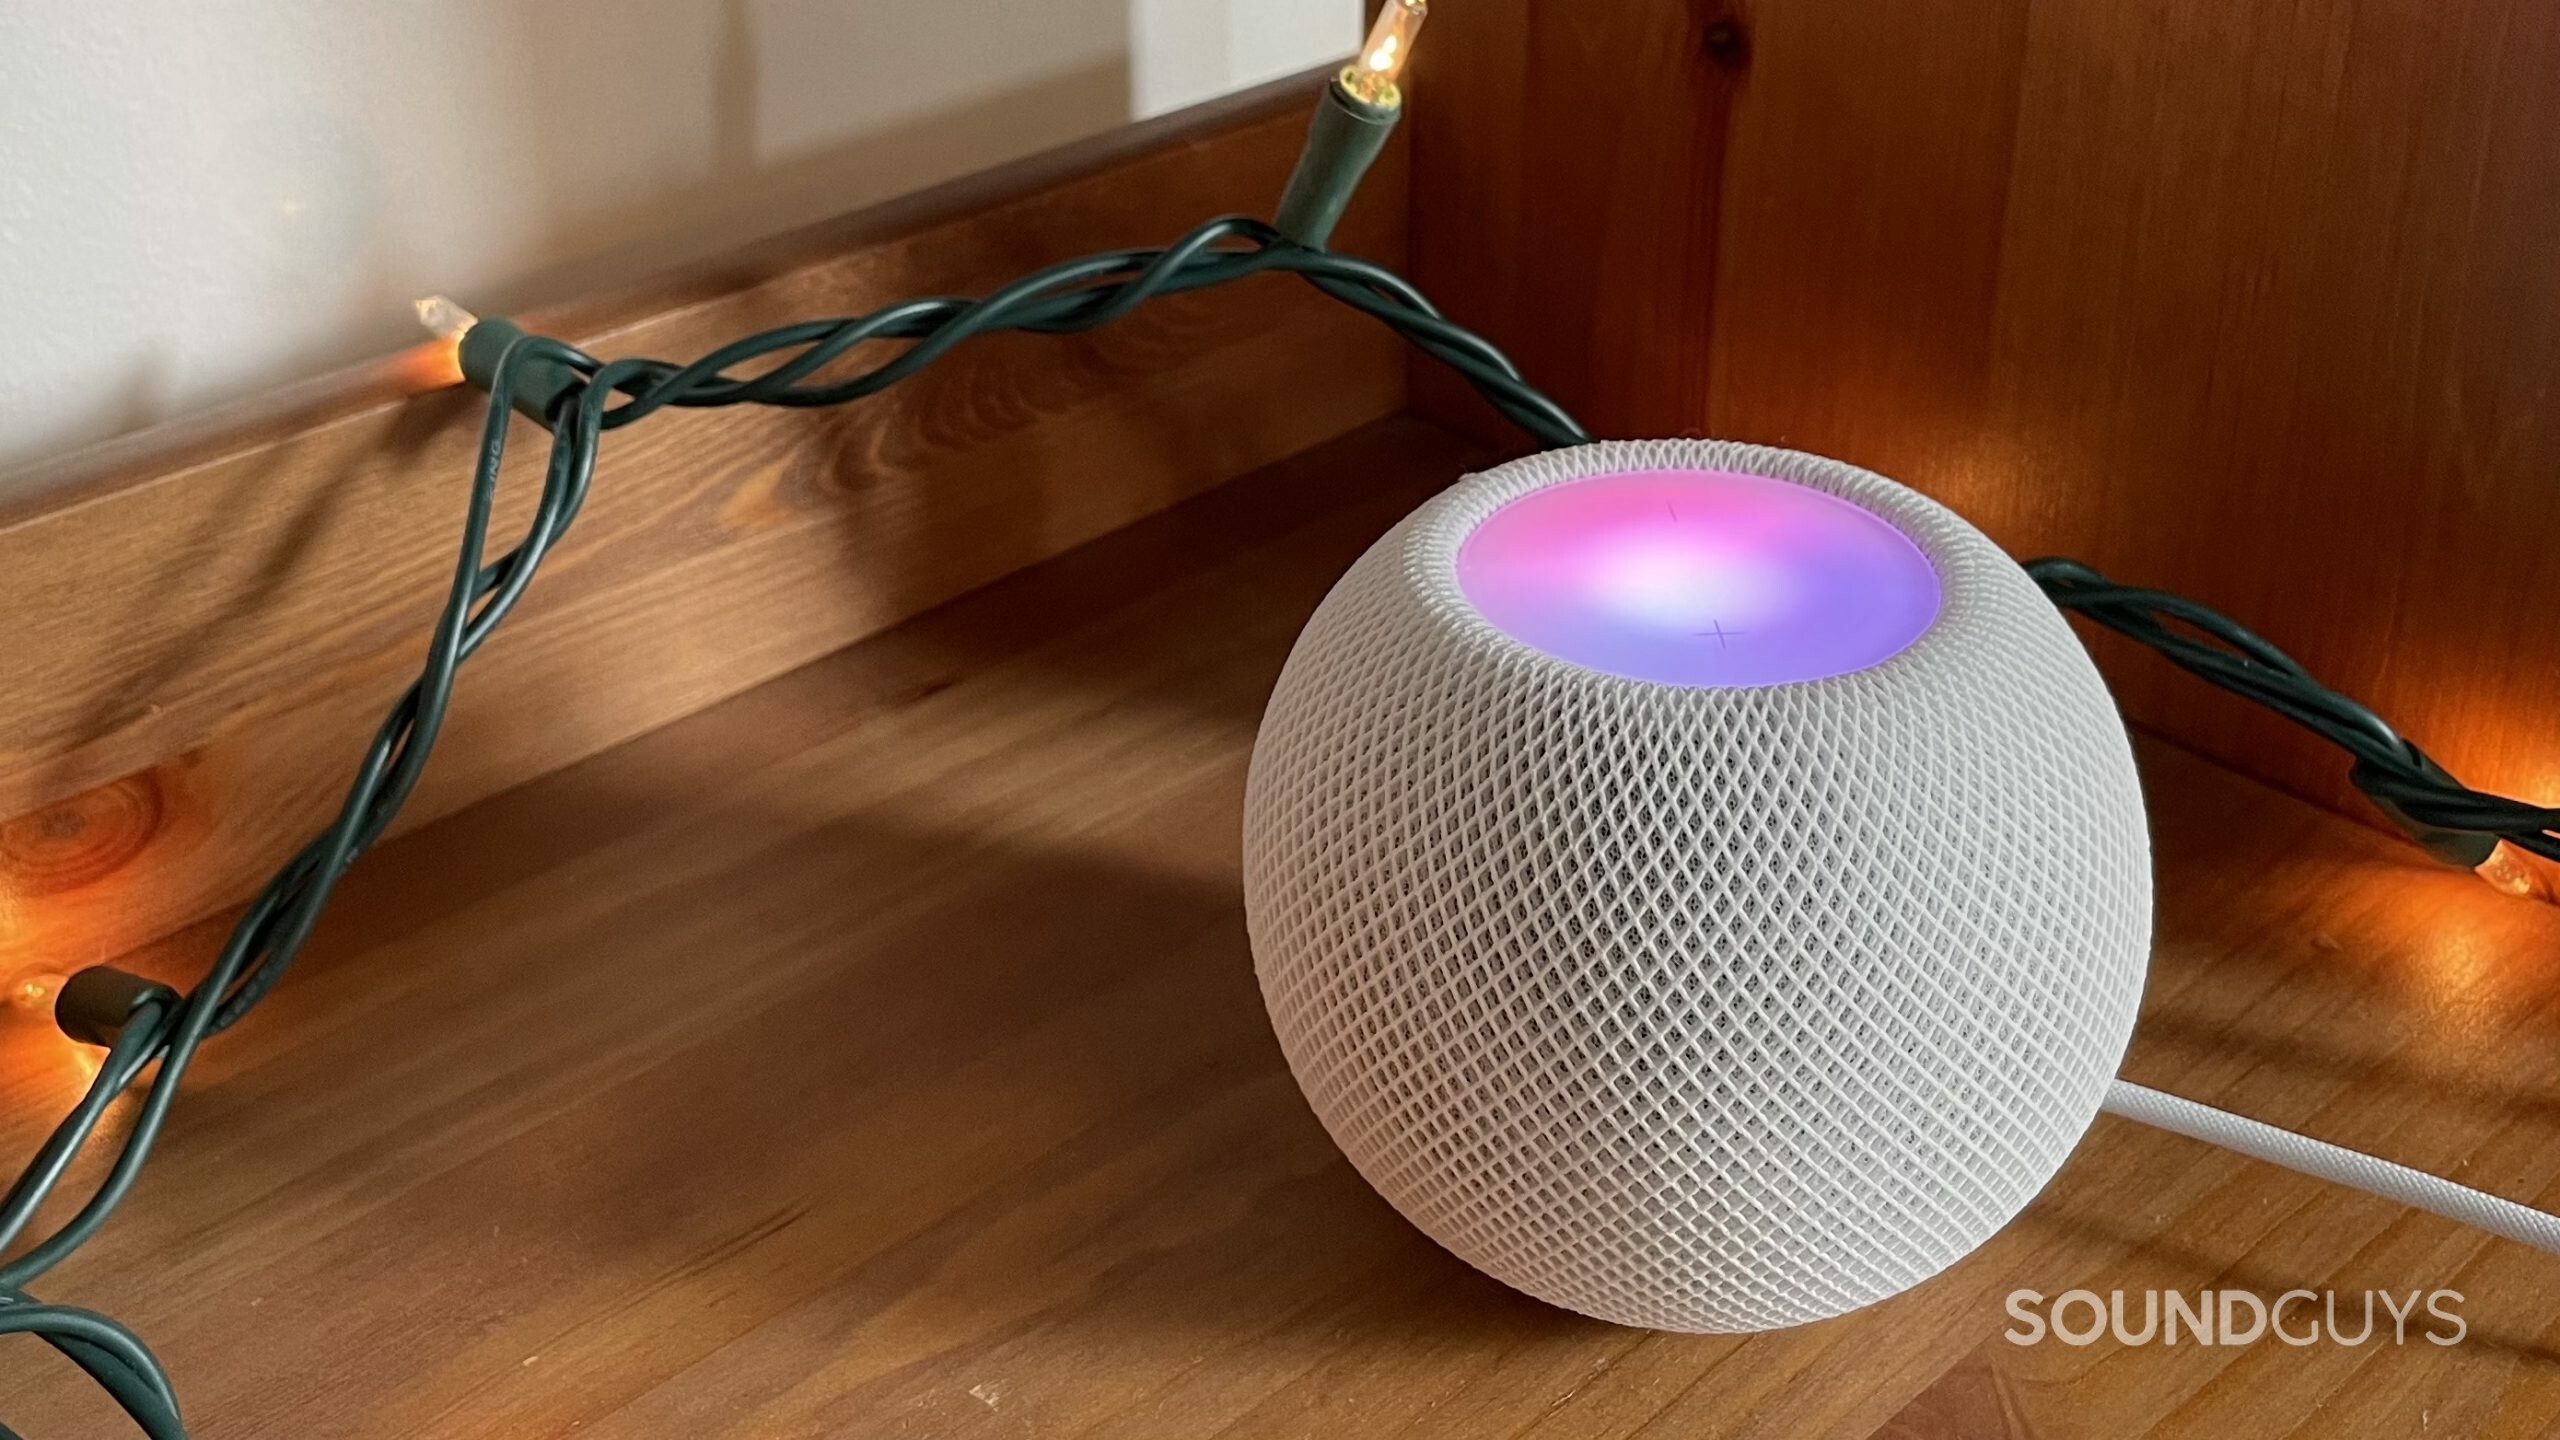 Apple HomePod mini with touchpad glowing pink and purple on a bookshelf. A string of lights is used to frame the HomePod mini.